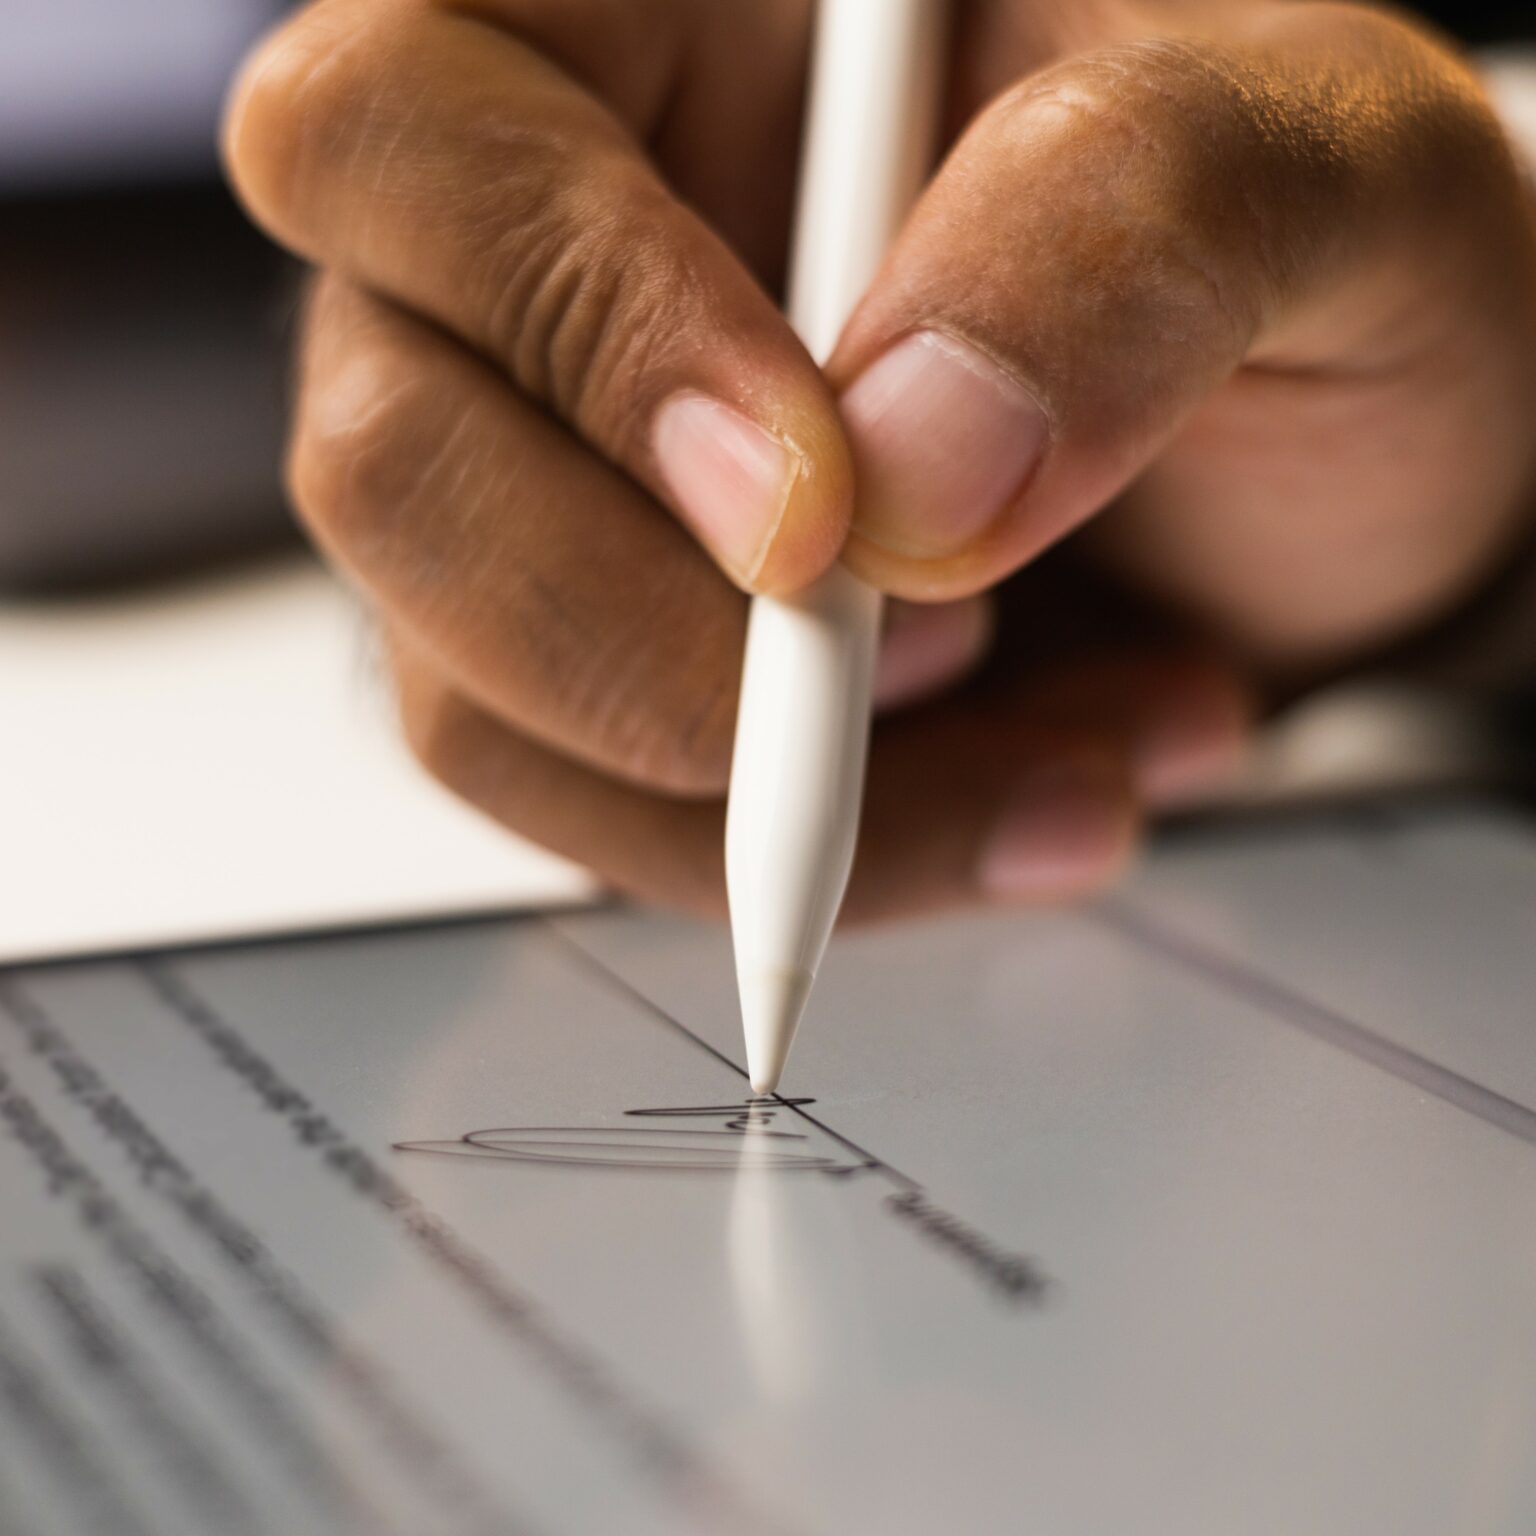 Close-up image of person's hand holding a stylus pen and signing paperwork on a tablet screen. References a real estate agent and home inspector pre-inspection agreement being signed.